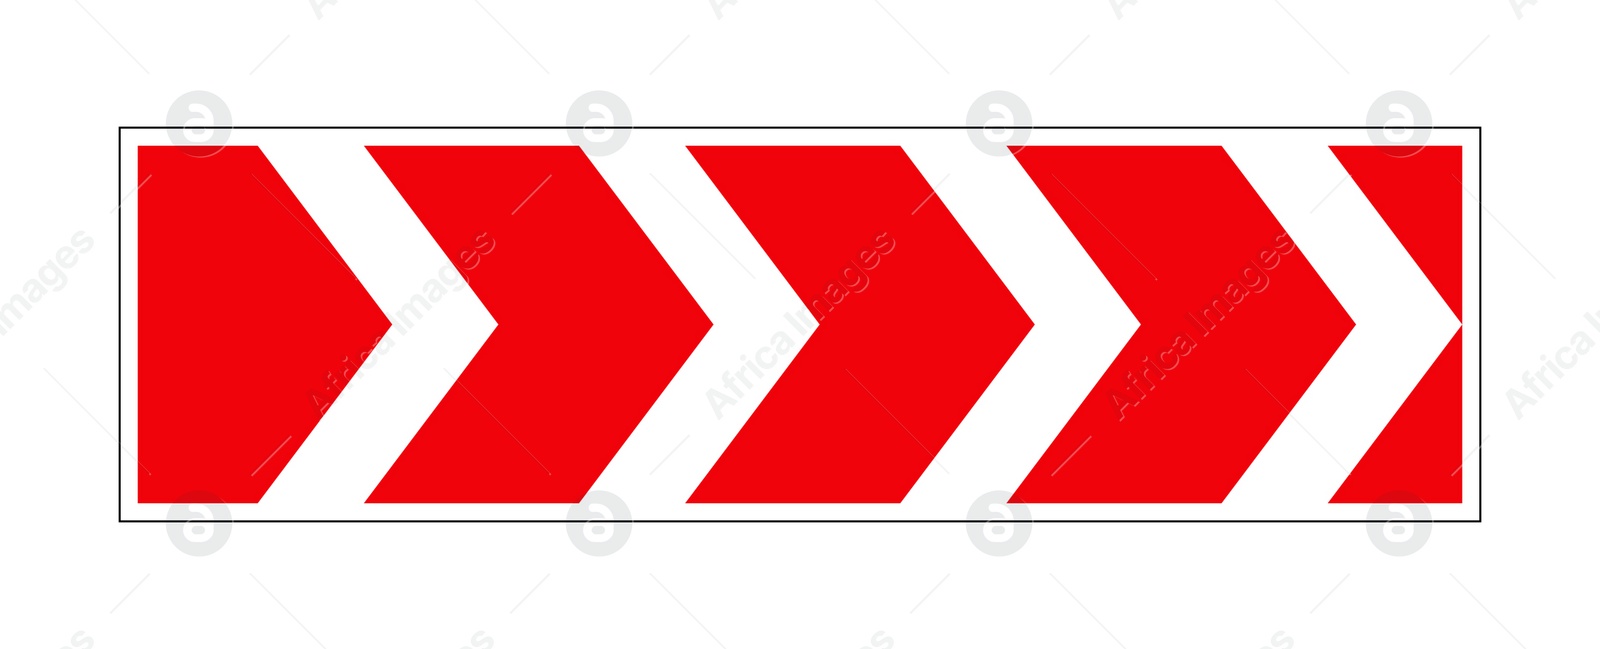 Illustration of Traffic sign with red arrows on white background, illustration